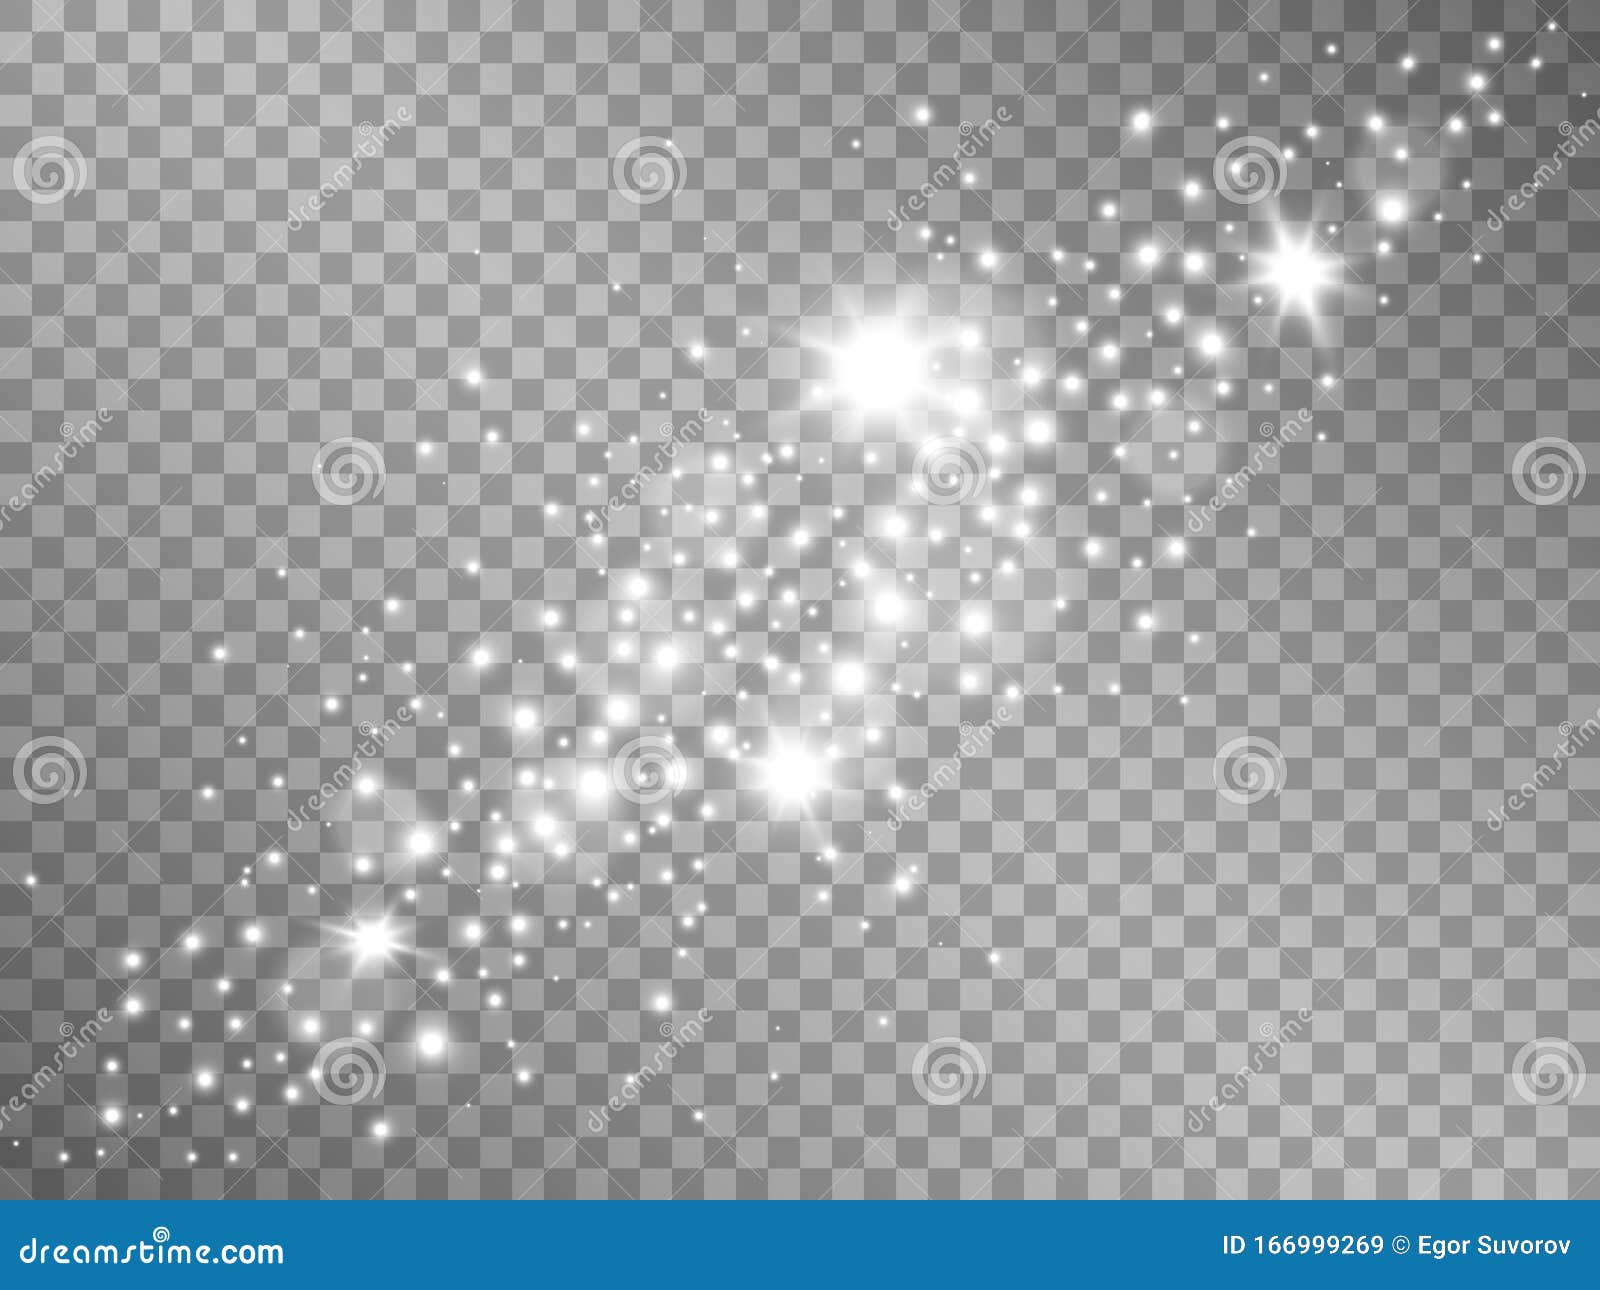 silver lights on transparent background. sparkling stardust with glowing stars. magic light template with silver dust